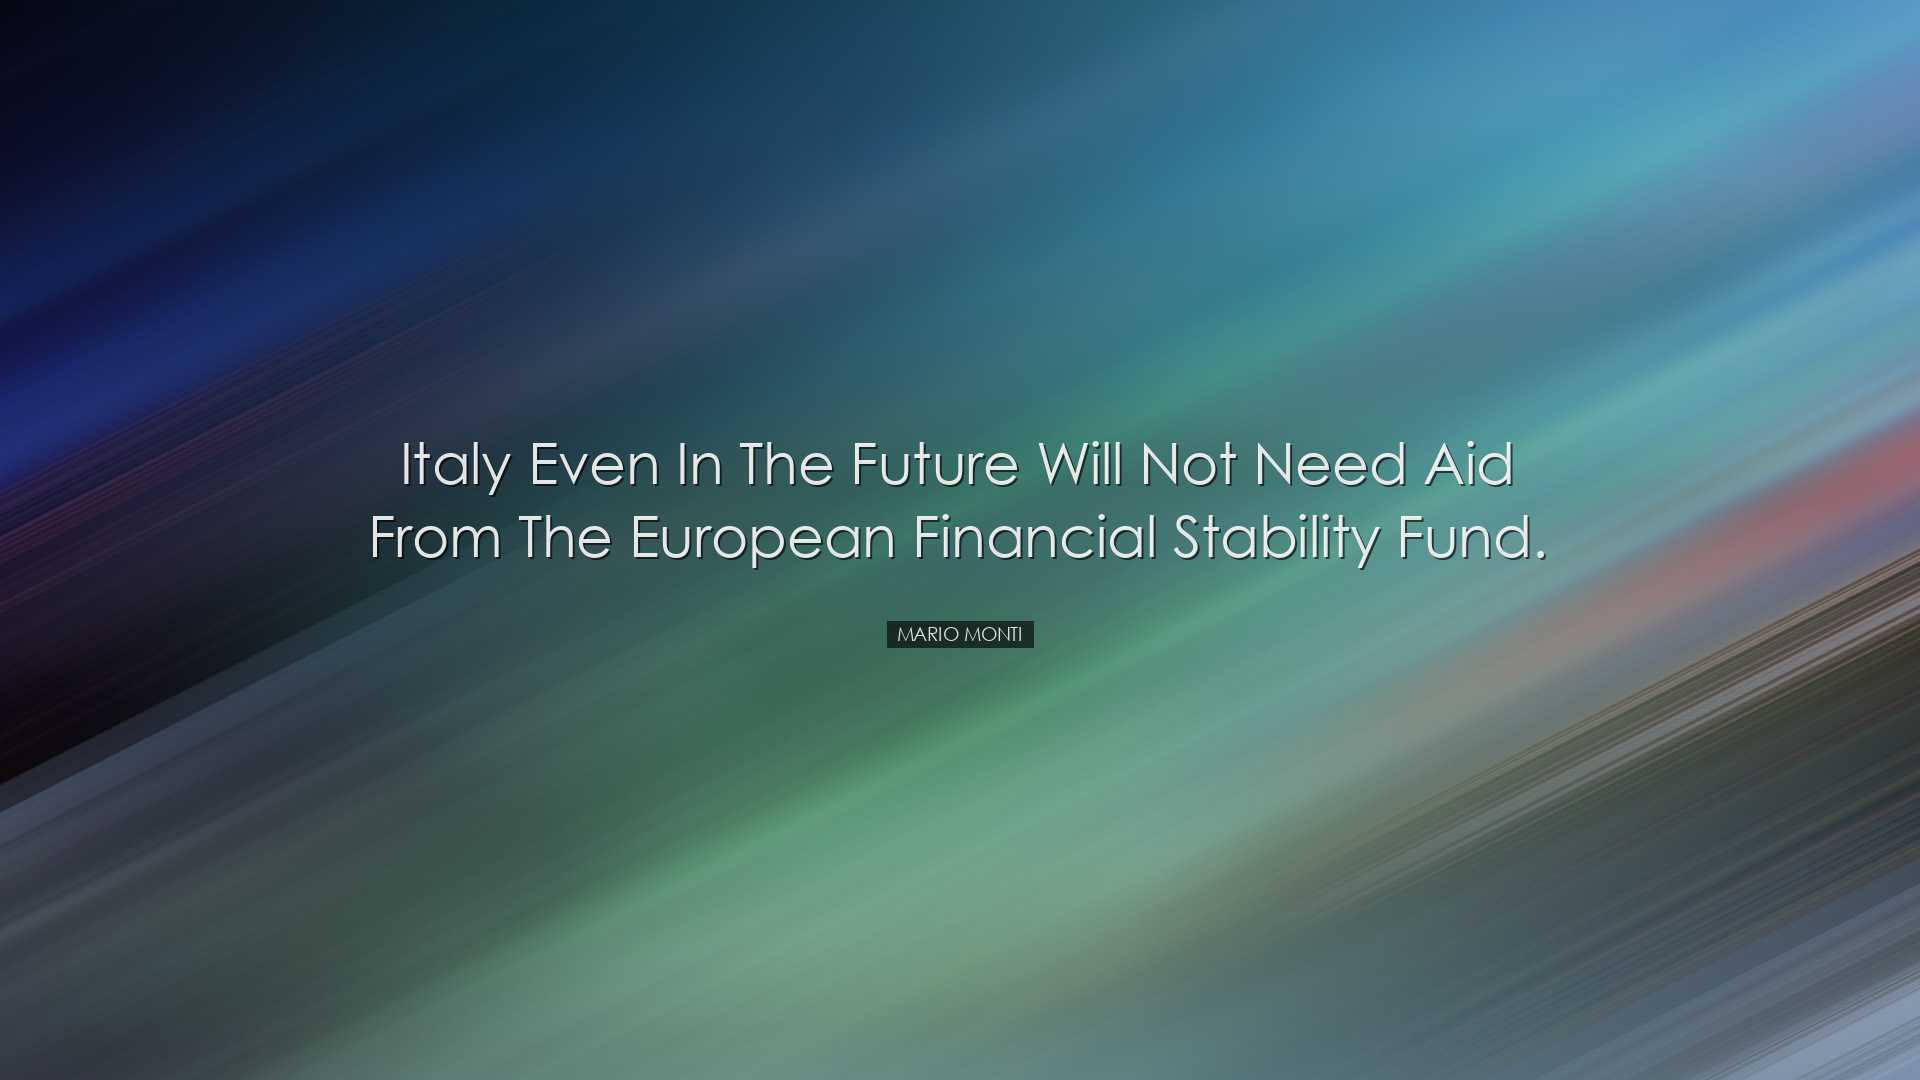 Italy even in the future will not need aid from the European Finan